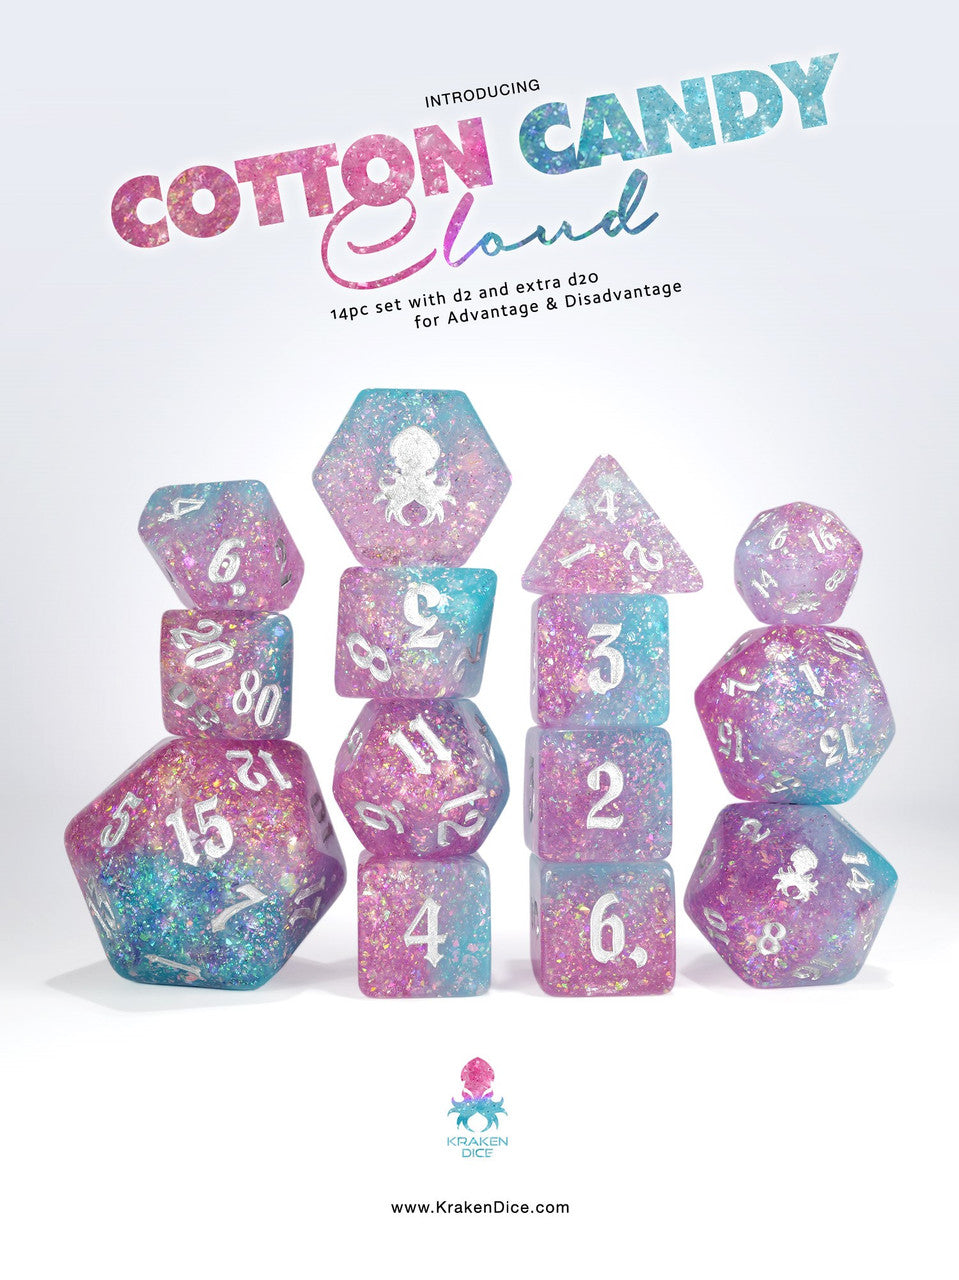 Cotton Candy Cloud 14pc - Limited Run - Silver Ink Dice Set